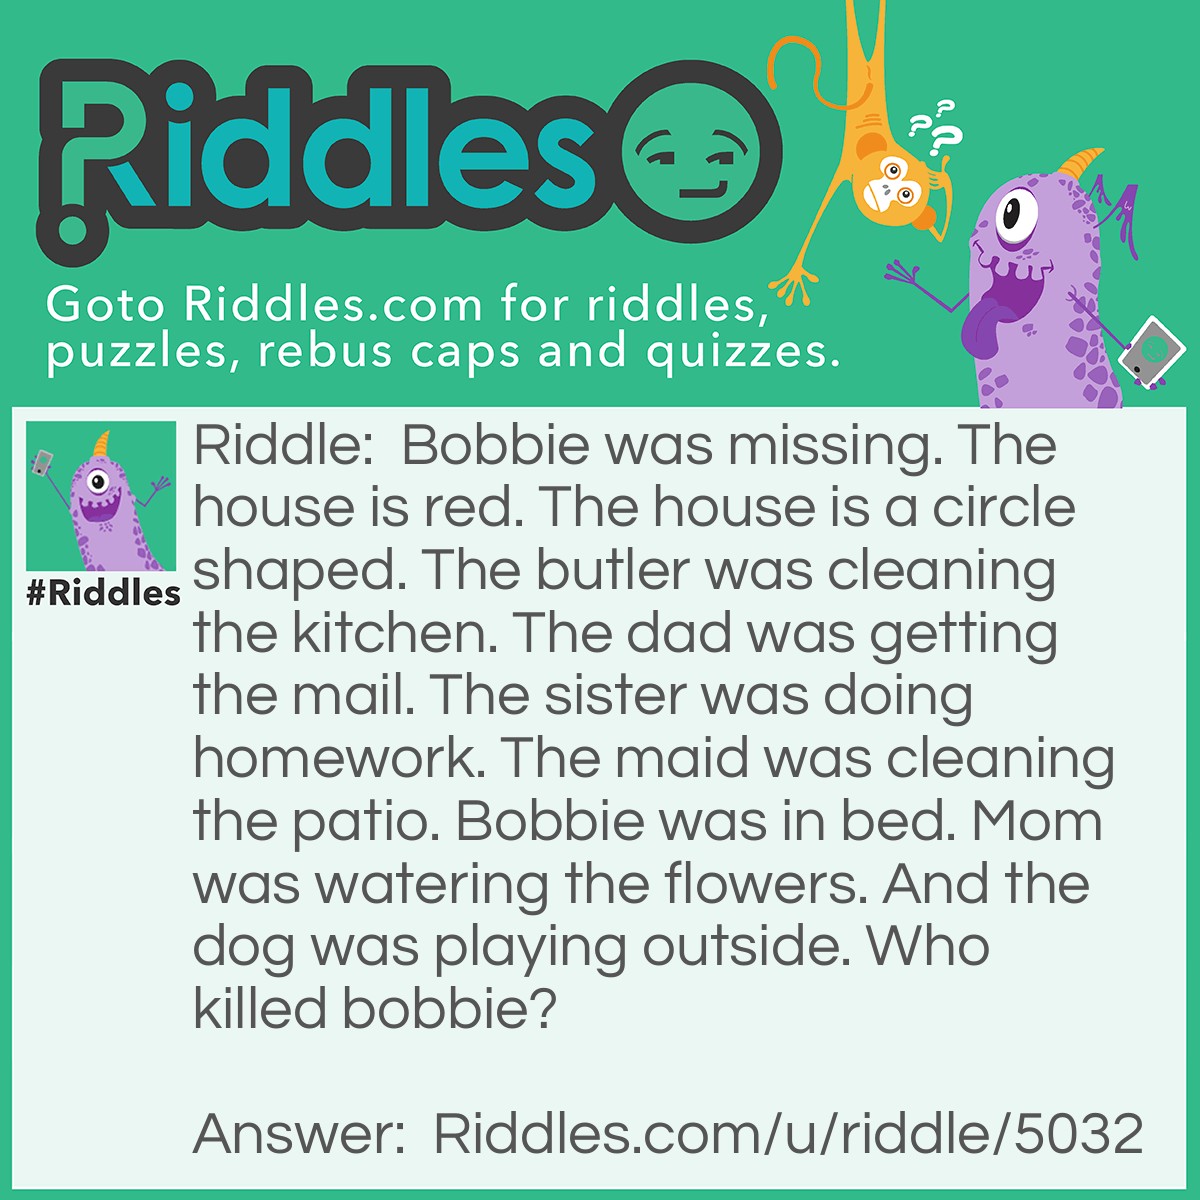 Riddle: Bobbie was missing. The house is red. The house is a circle shaped. The butler was cleaning the kitchen. The dad was getting the mail. The sister was doing homework. The maid was cleaning the patio. Bobbie was in bed. Mom was watering the flowers. And the dog was playing outside. Who killed bobbie? Answer: Bobbie was never killed. He was sleeping in bed.